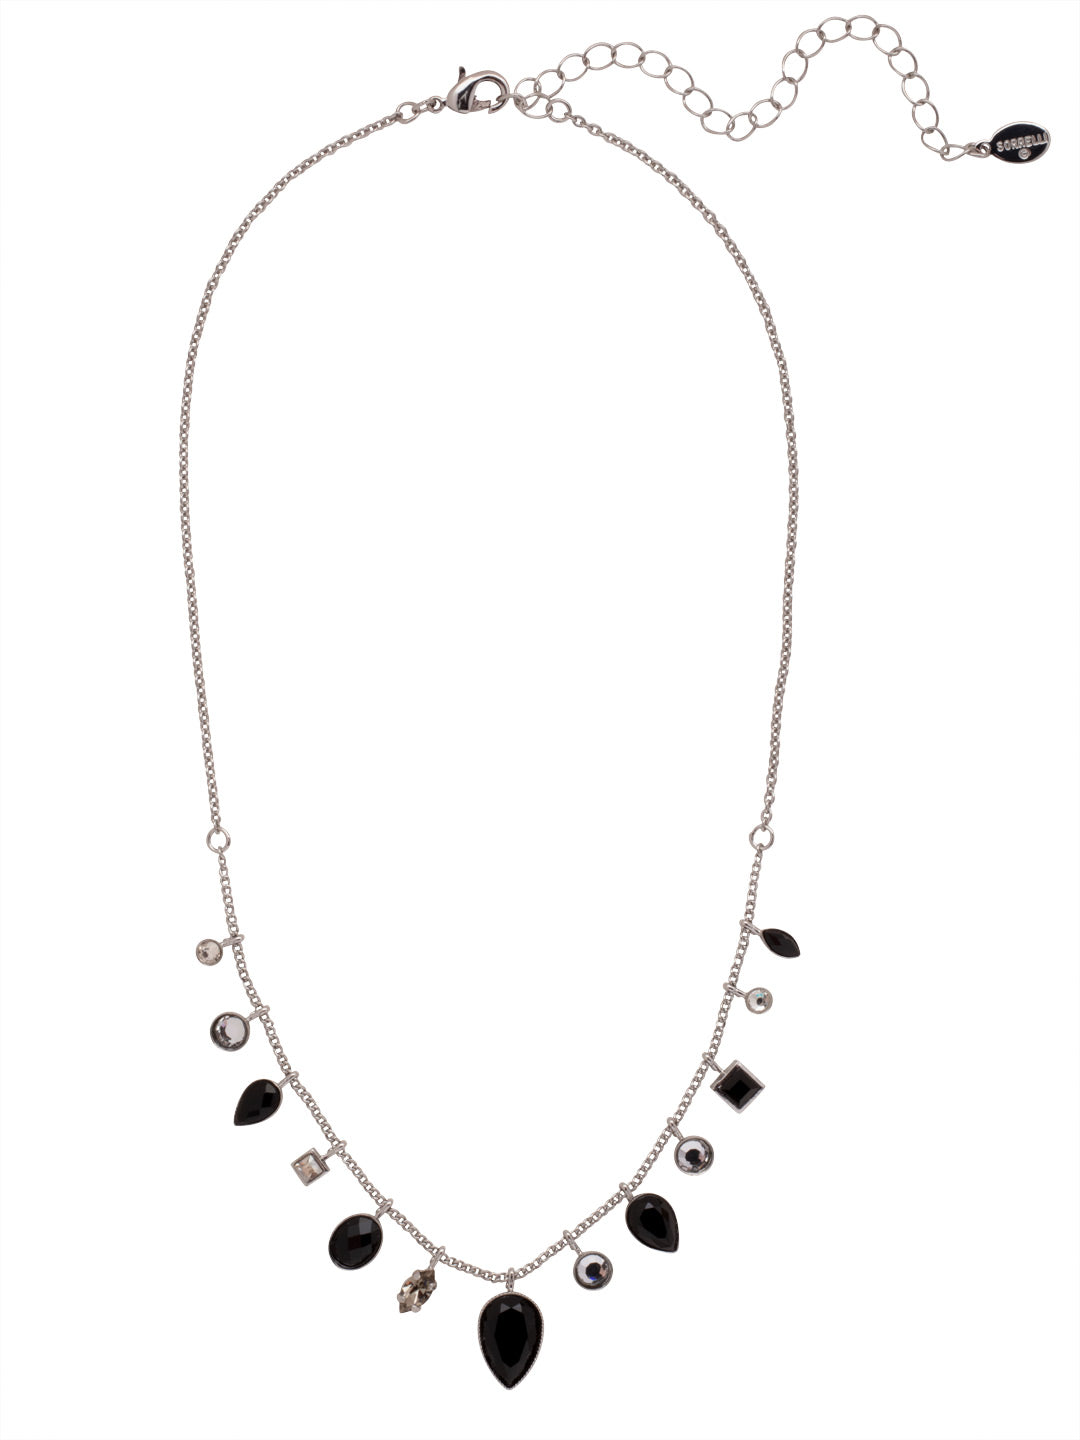 Elaina Tennis Necklace - NFC70PDSNI - <p>The Elaina Tennis Necklace features an assortment of delicate crystal and semi-precious charms on an adjustable lightweight chain, secured with a lobster claw clasp. From Sorrelli's Starry Night collection in our Palladium finish.</p>